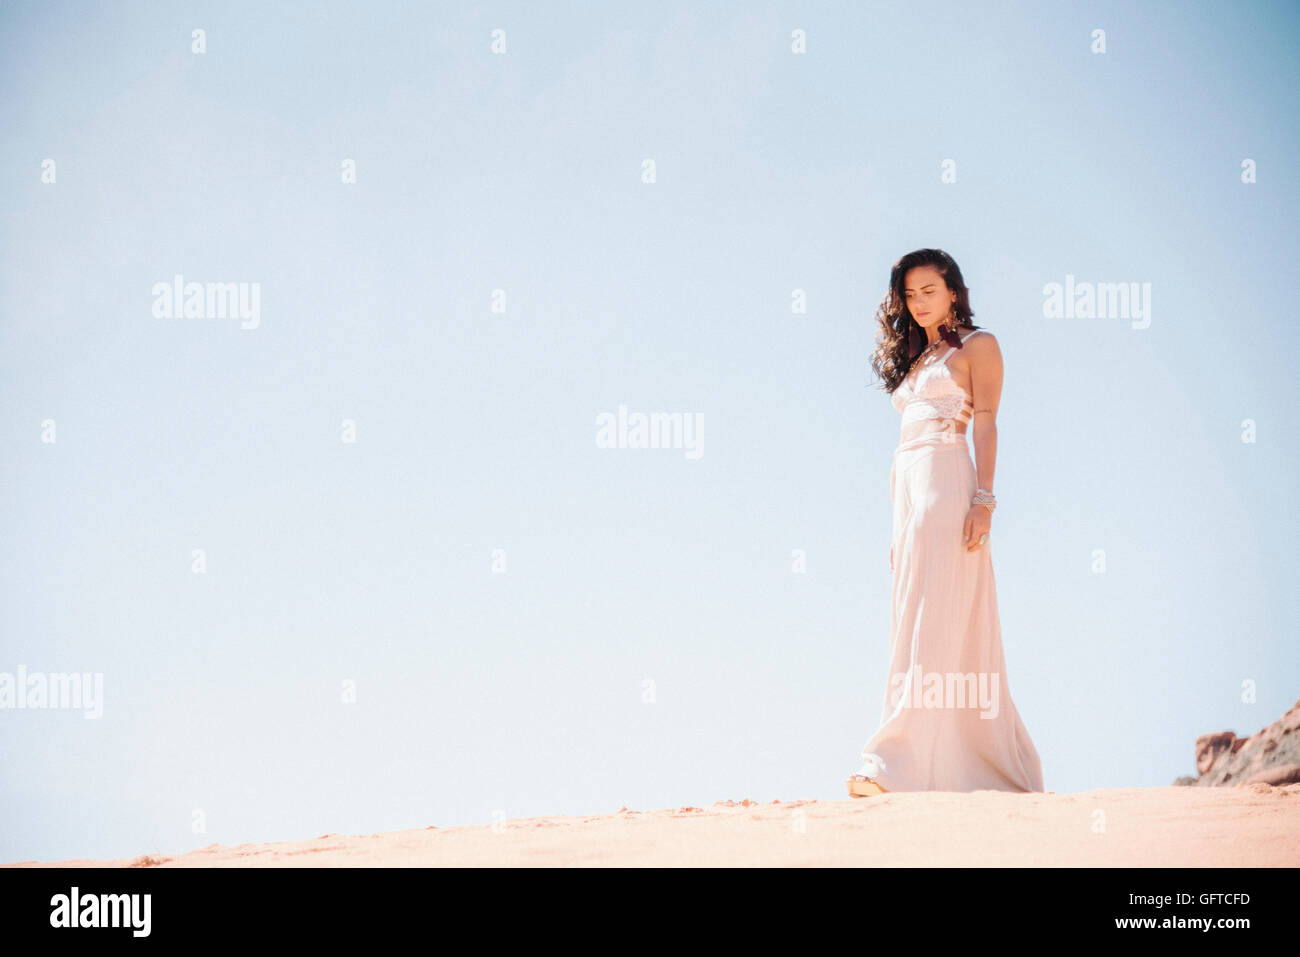 Young woman with long brown hair wearing a long white dress standing in a desert Stock Photo